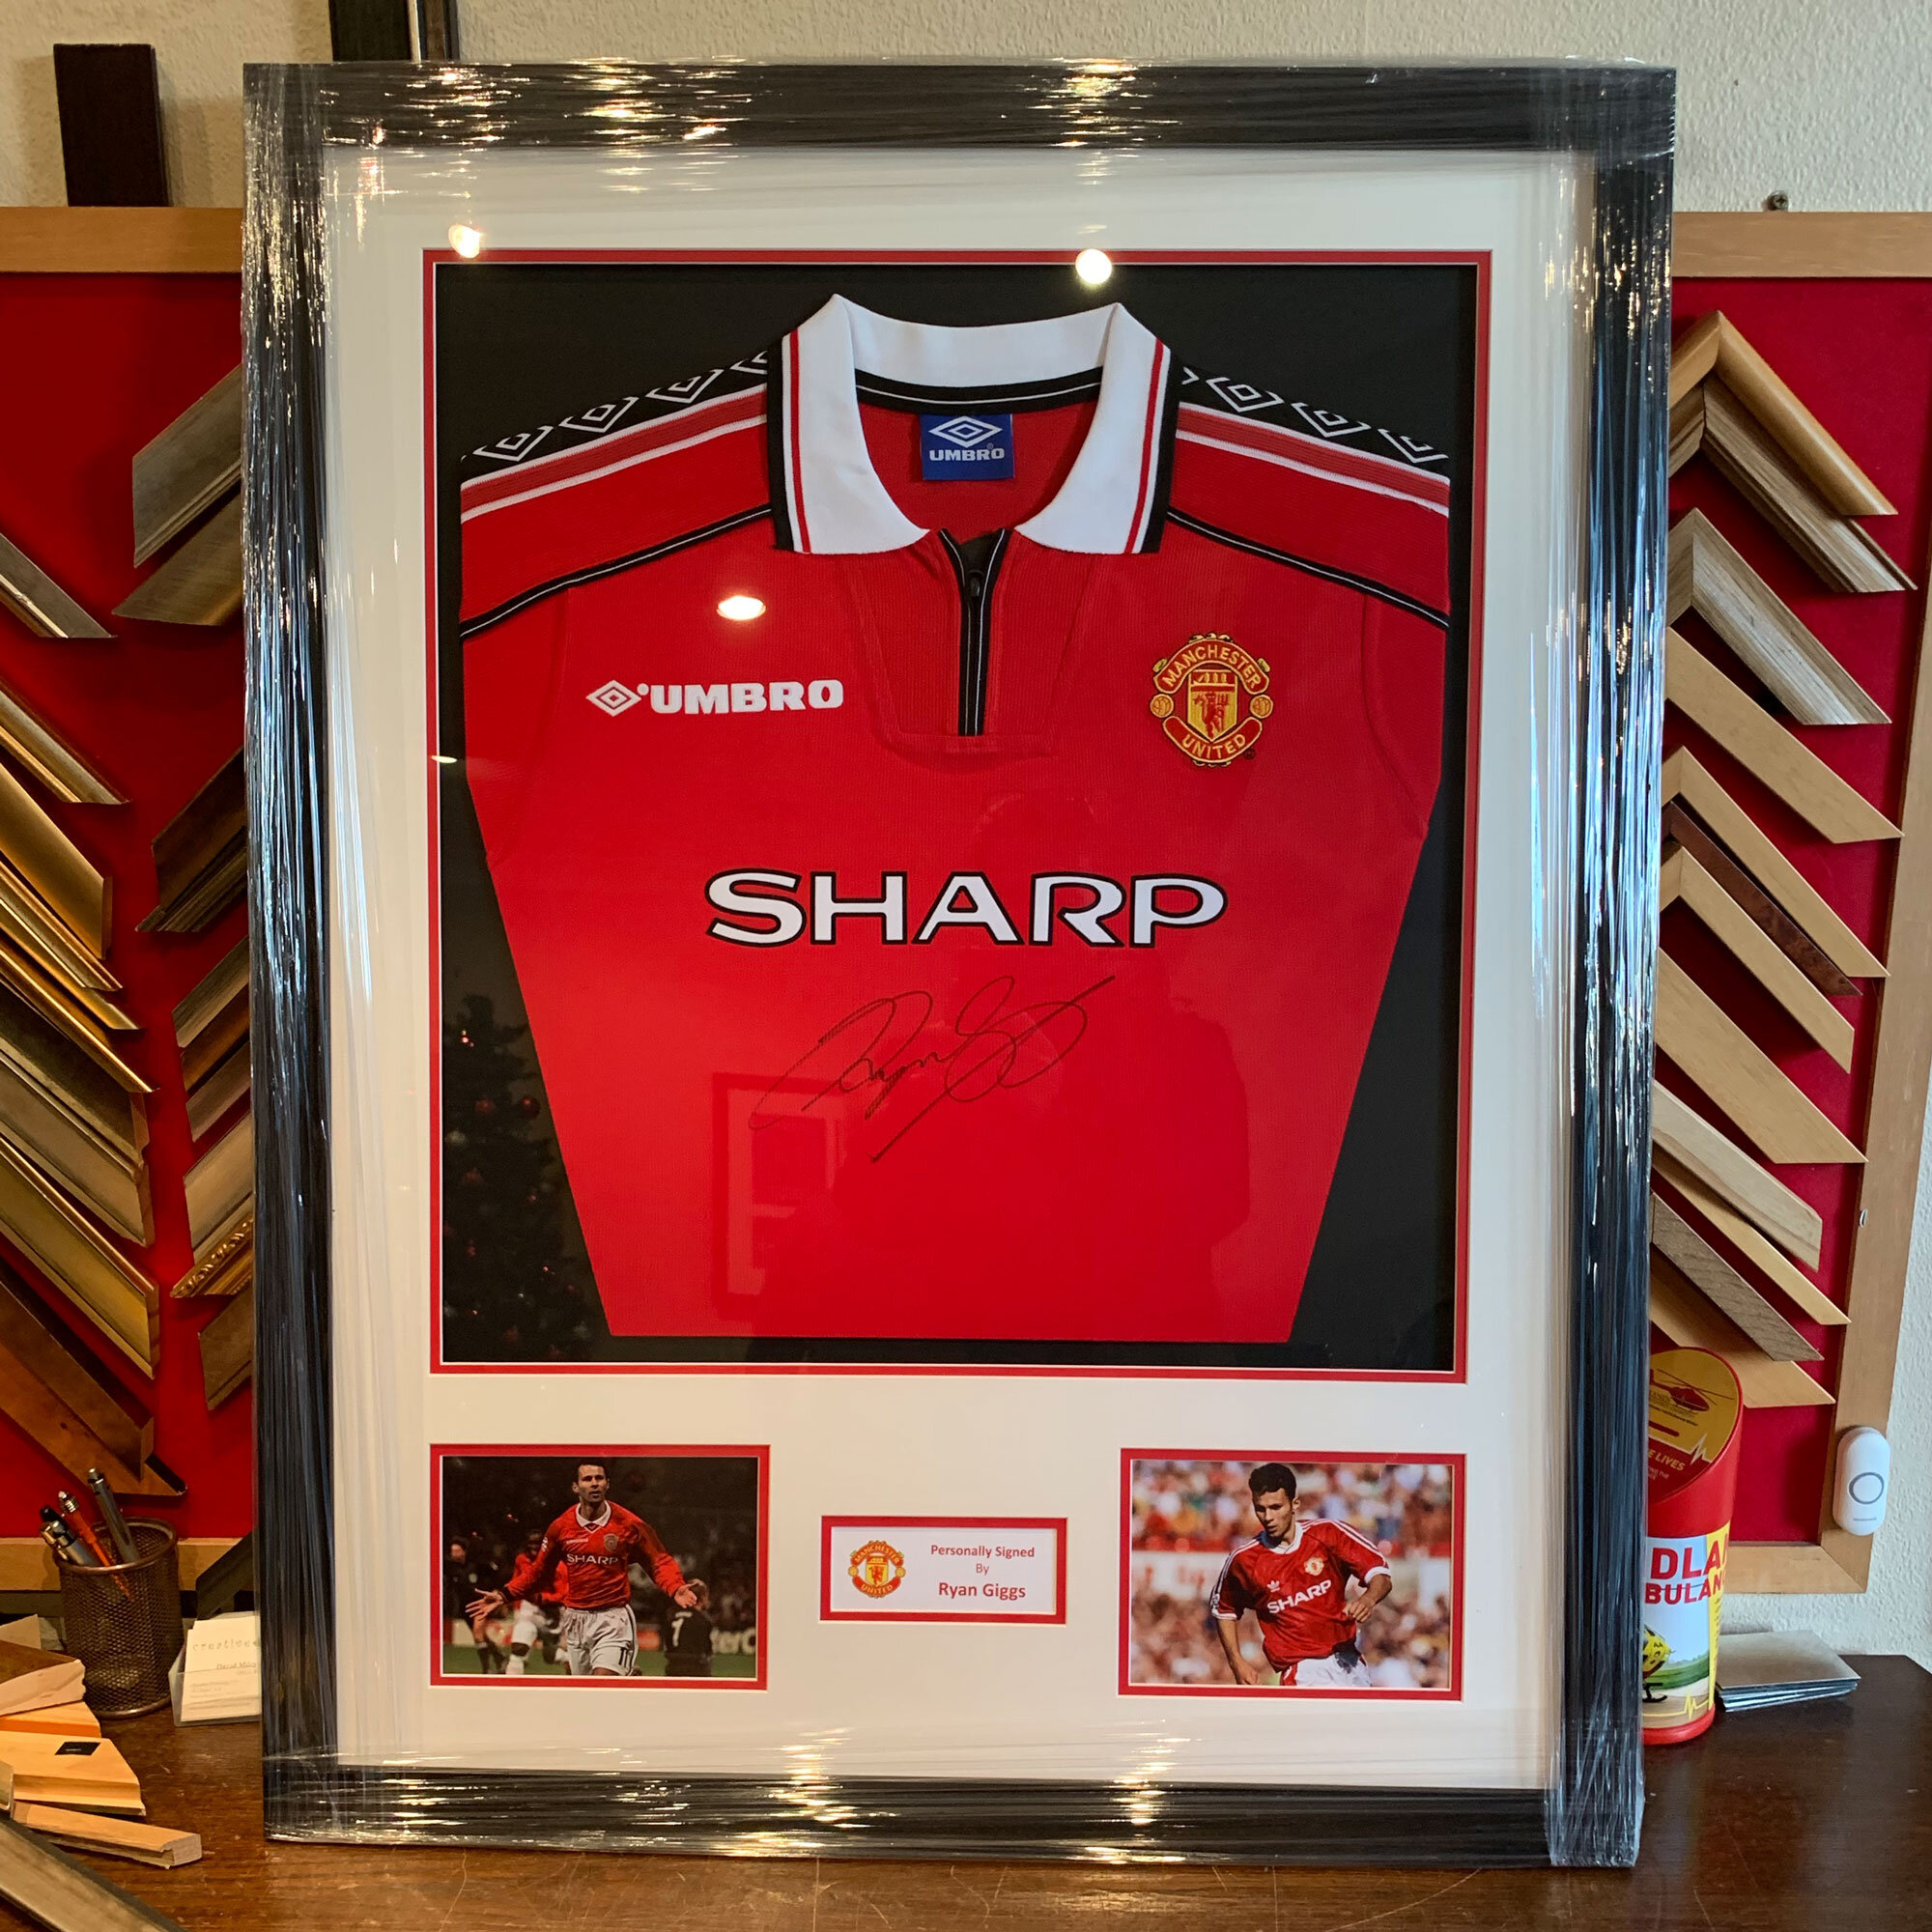 ryan giggs signed jersey